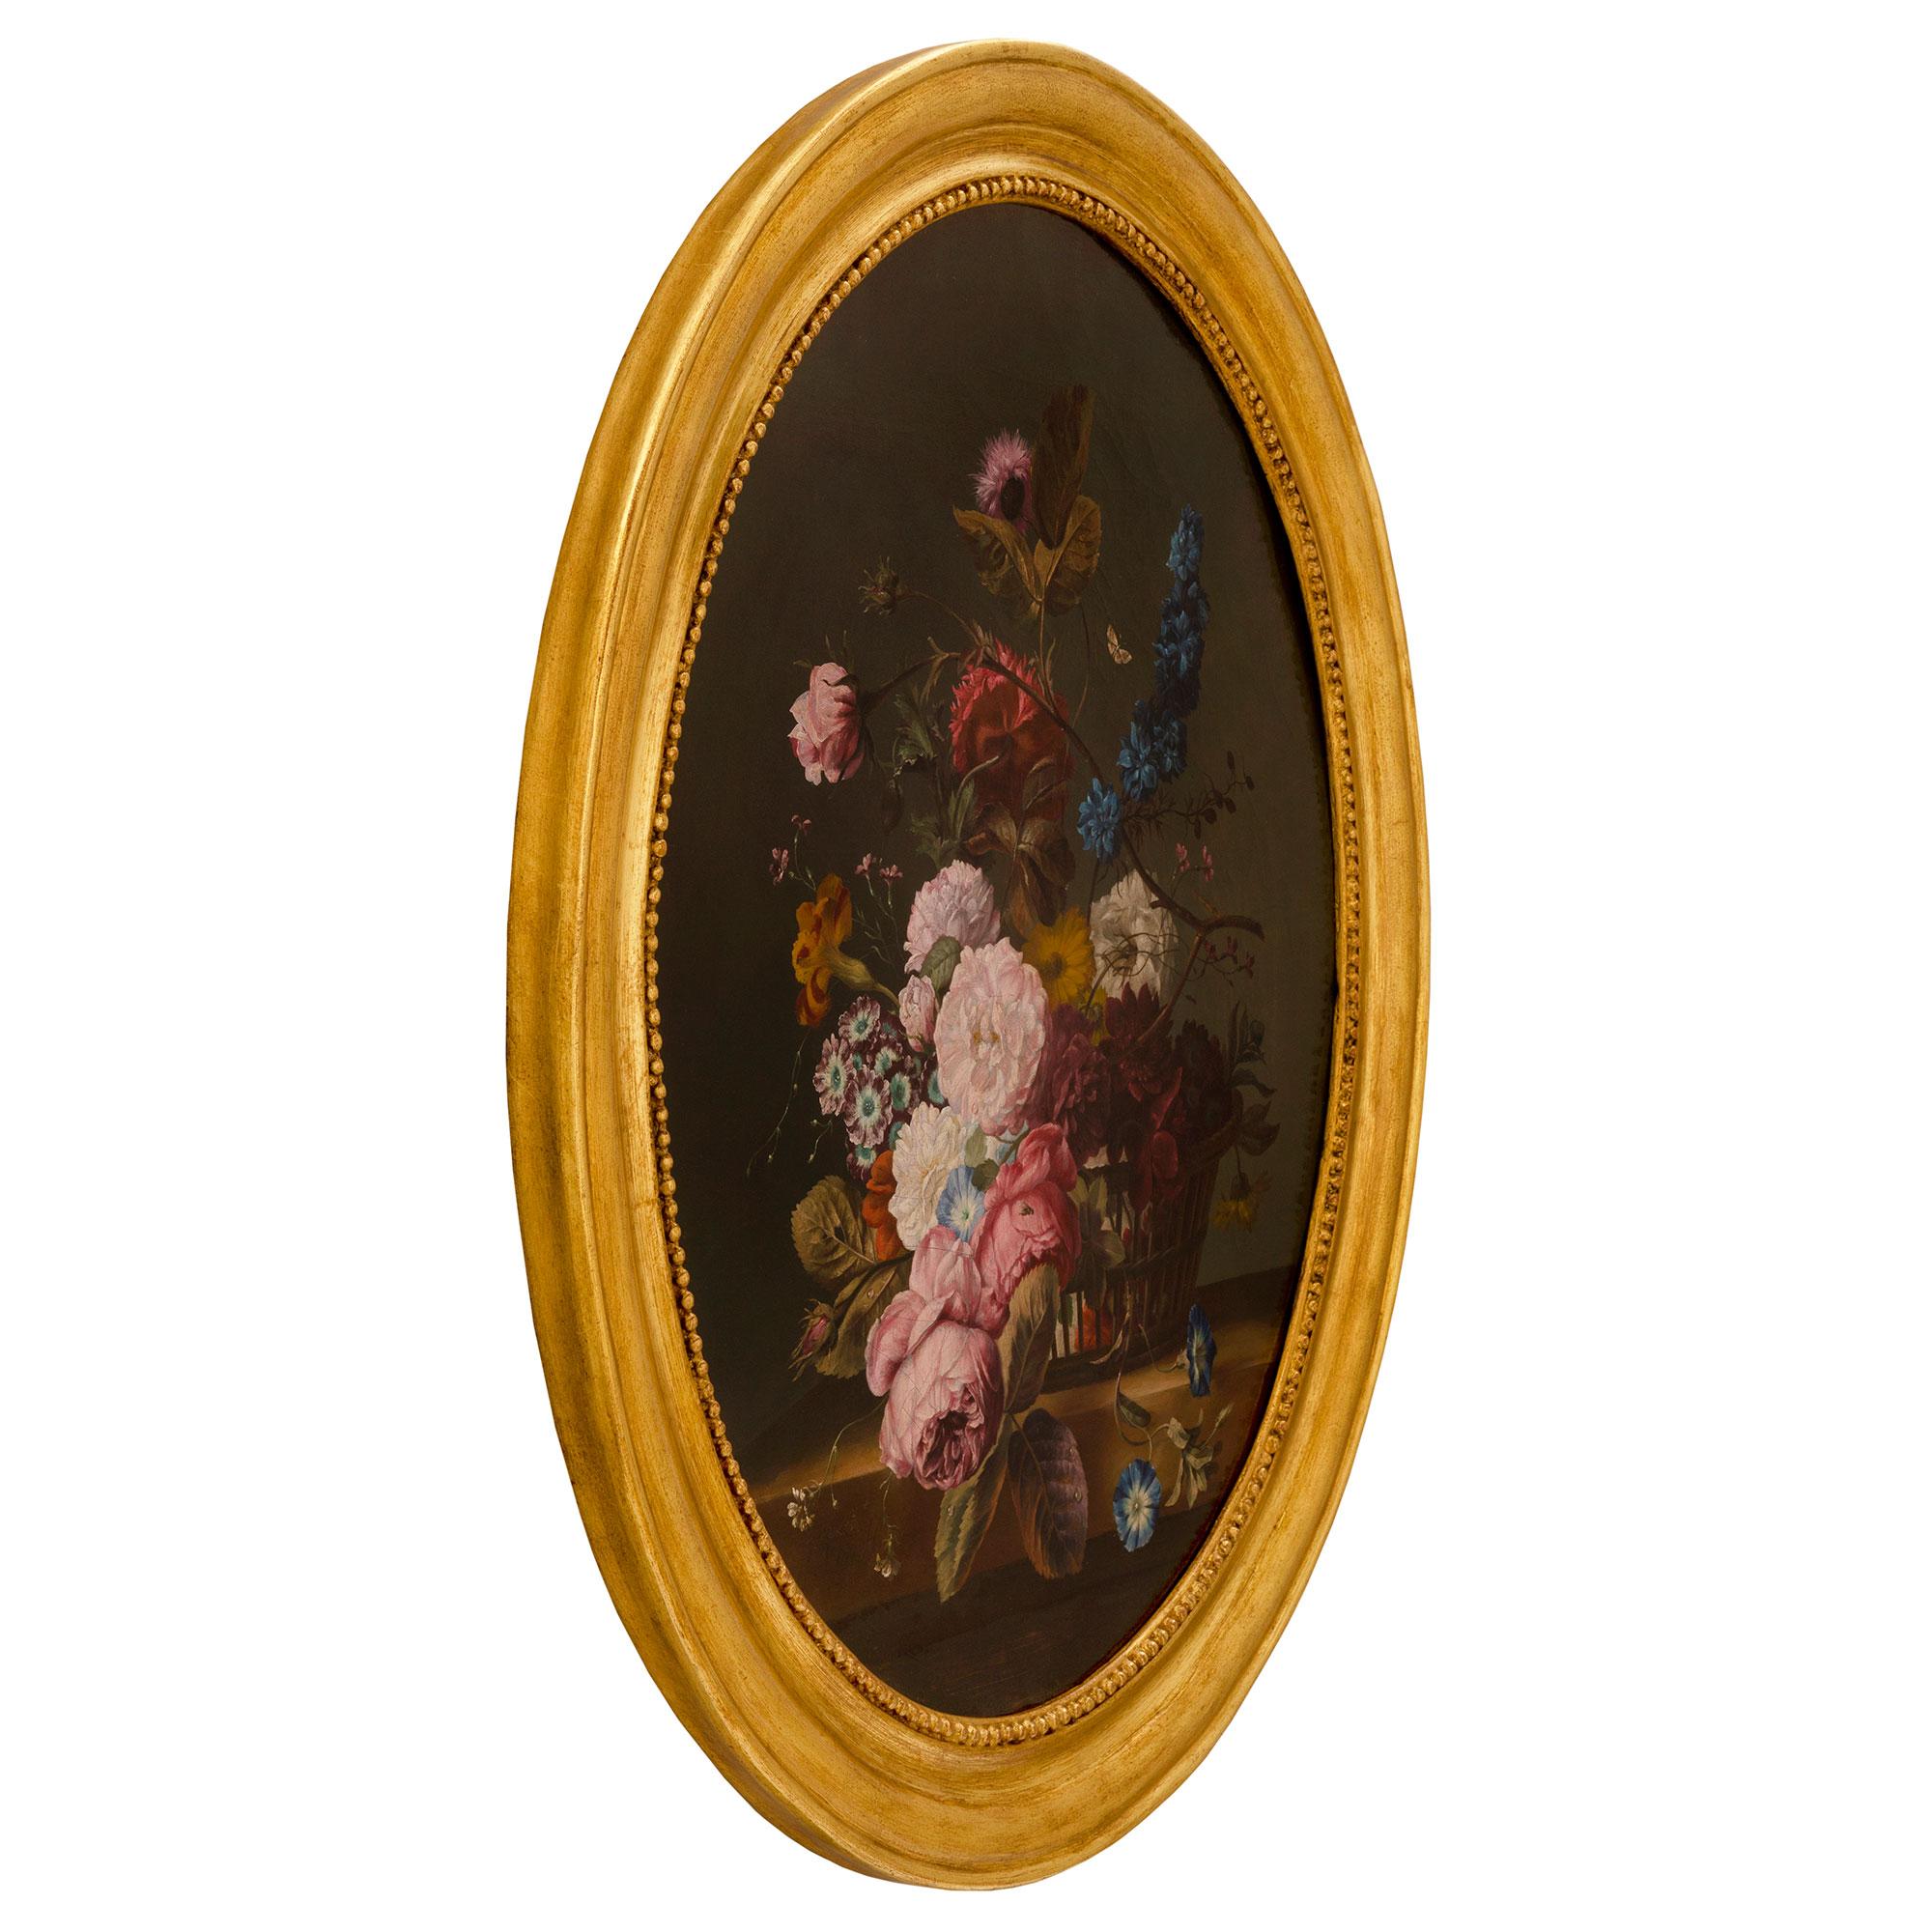 A fine and very decorative pair of French 19th century Louis XVI st. oil on canvas still life paintings. Each oval shaped painting is set within their original elegant giltwood frame with a mottled and beaded design. The painting depicts charming